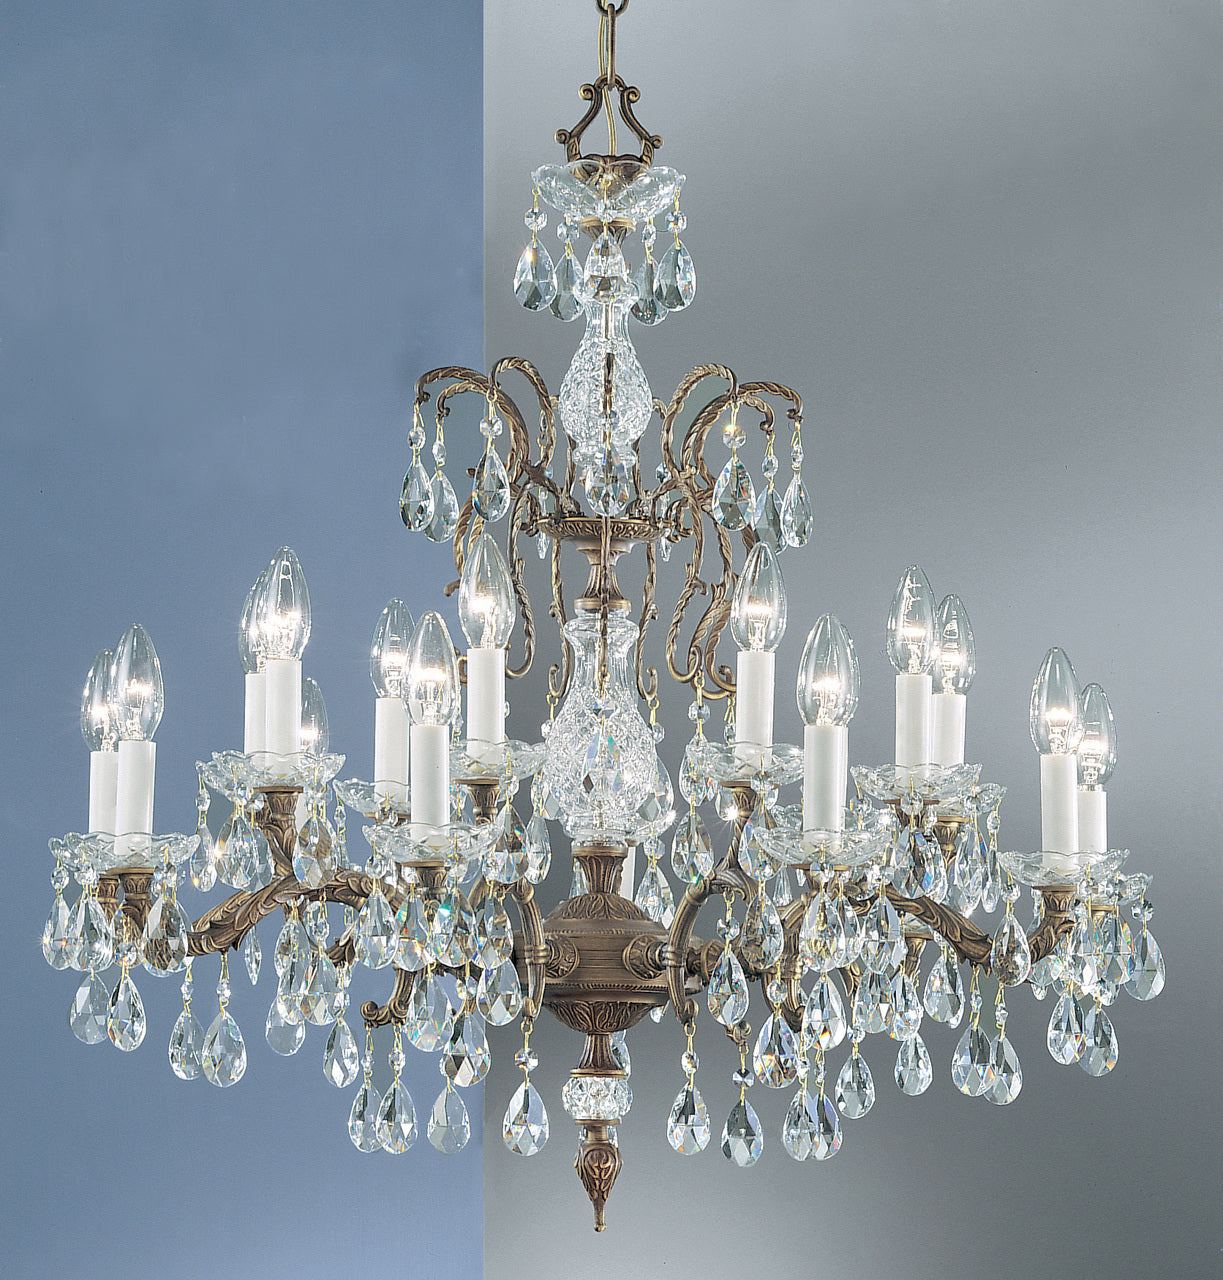 Classic Lighting 5538 RB CGT Madrid Crystal/Cast Brass Chandelier in Roman Bronze (Imported from Spain)